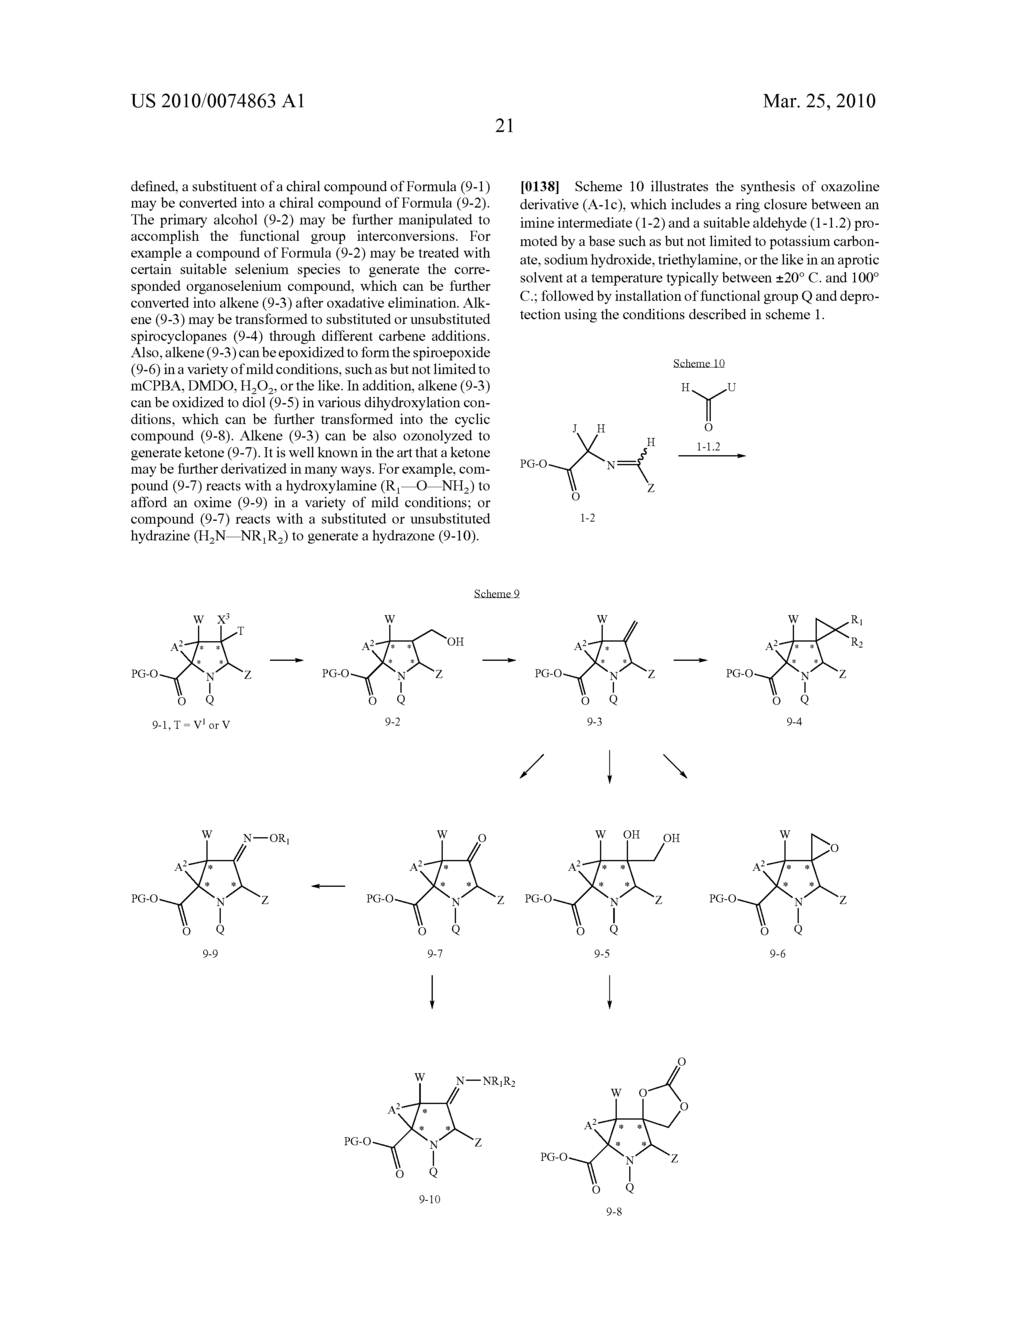 ANTI-INFECTIVE PYRROLIDINE DERIVATIVES AND ANALOGS - diagram, schematic, and image 22